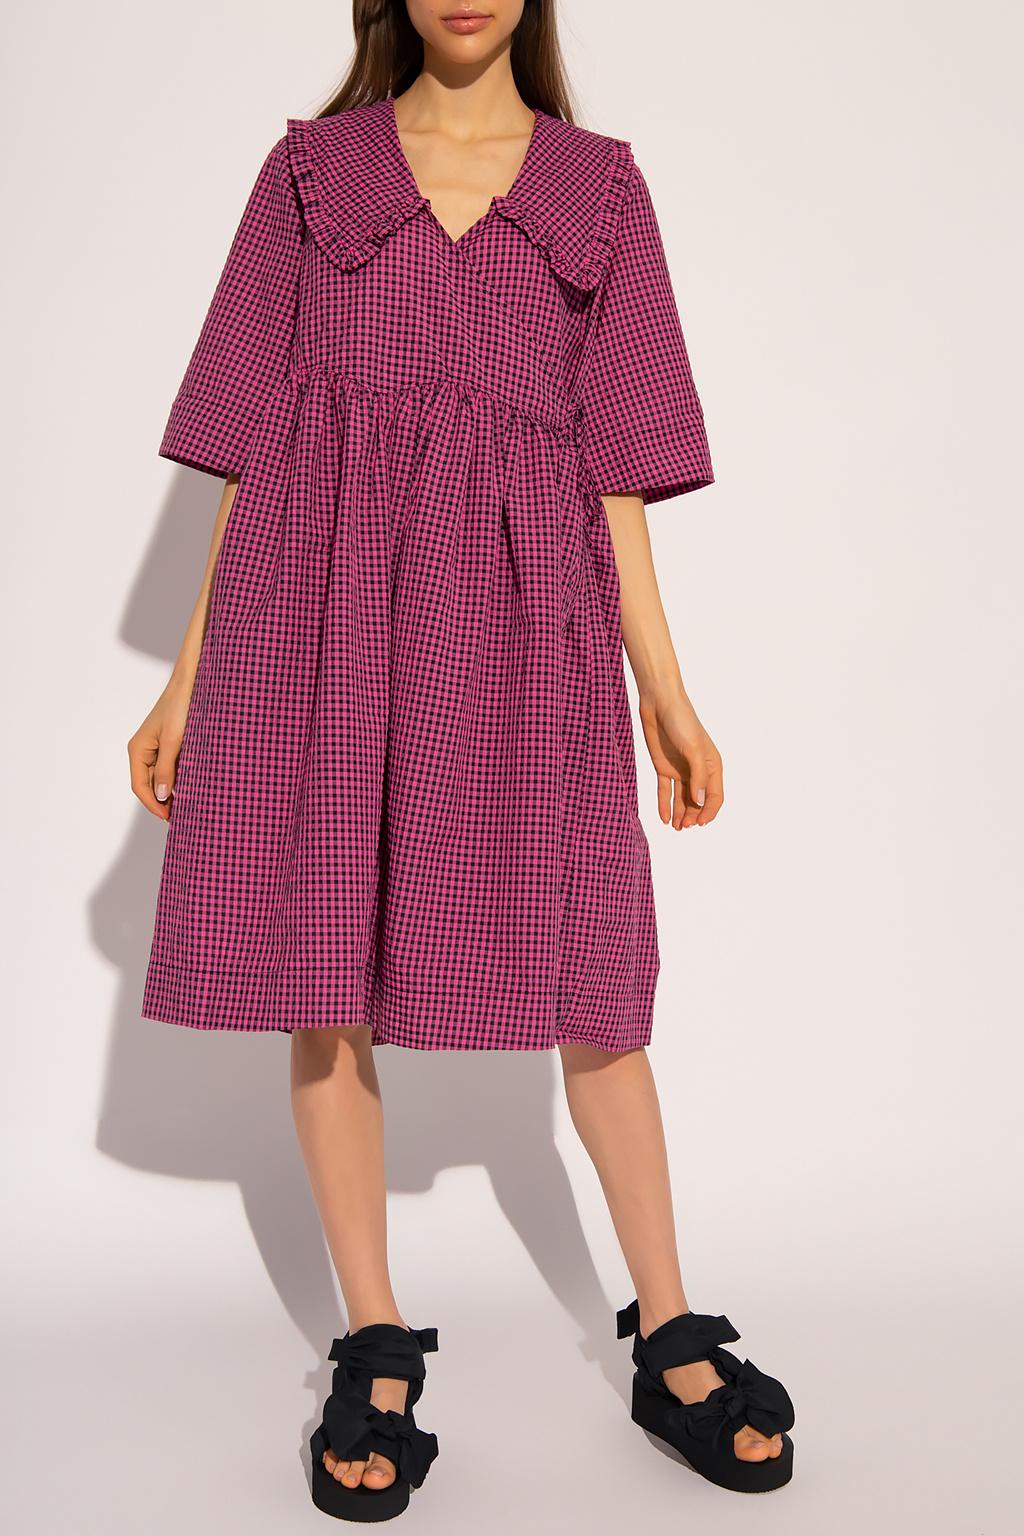 Ganni Checked Dress in Pink | Lyst